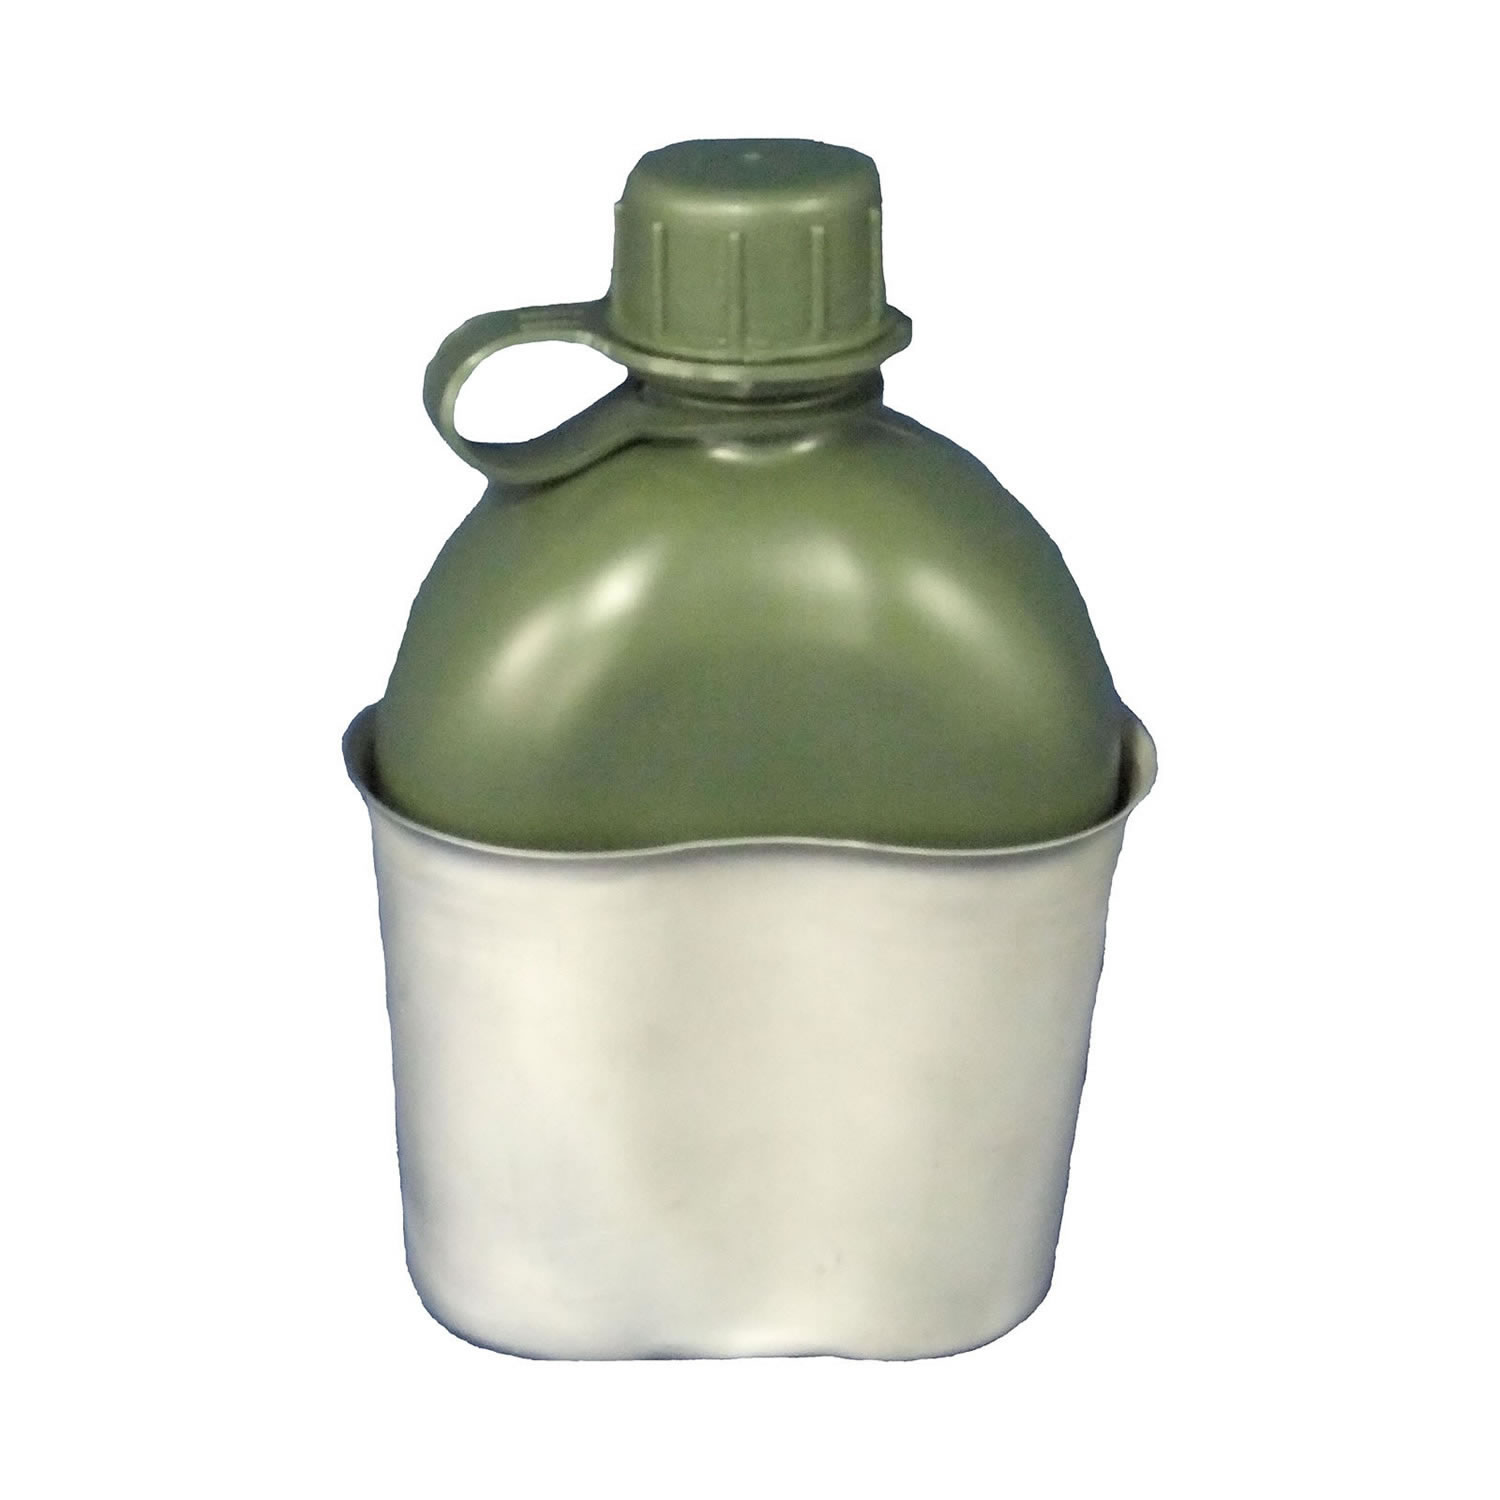 MILITARY 1L KIDNEY CANTEEN OD GREEN WITH O-RING SEALED LID BPA FREE 